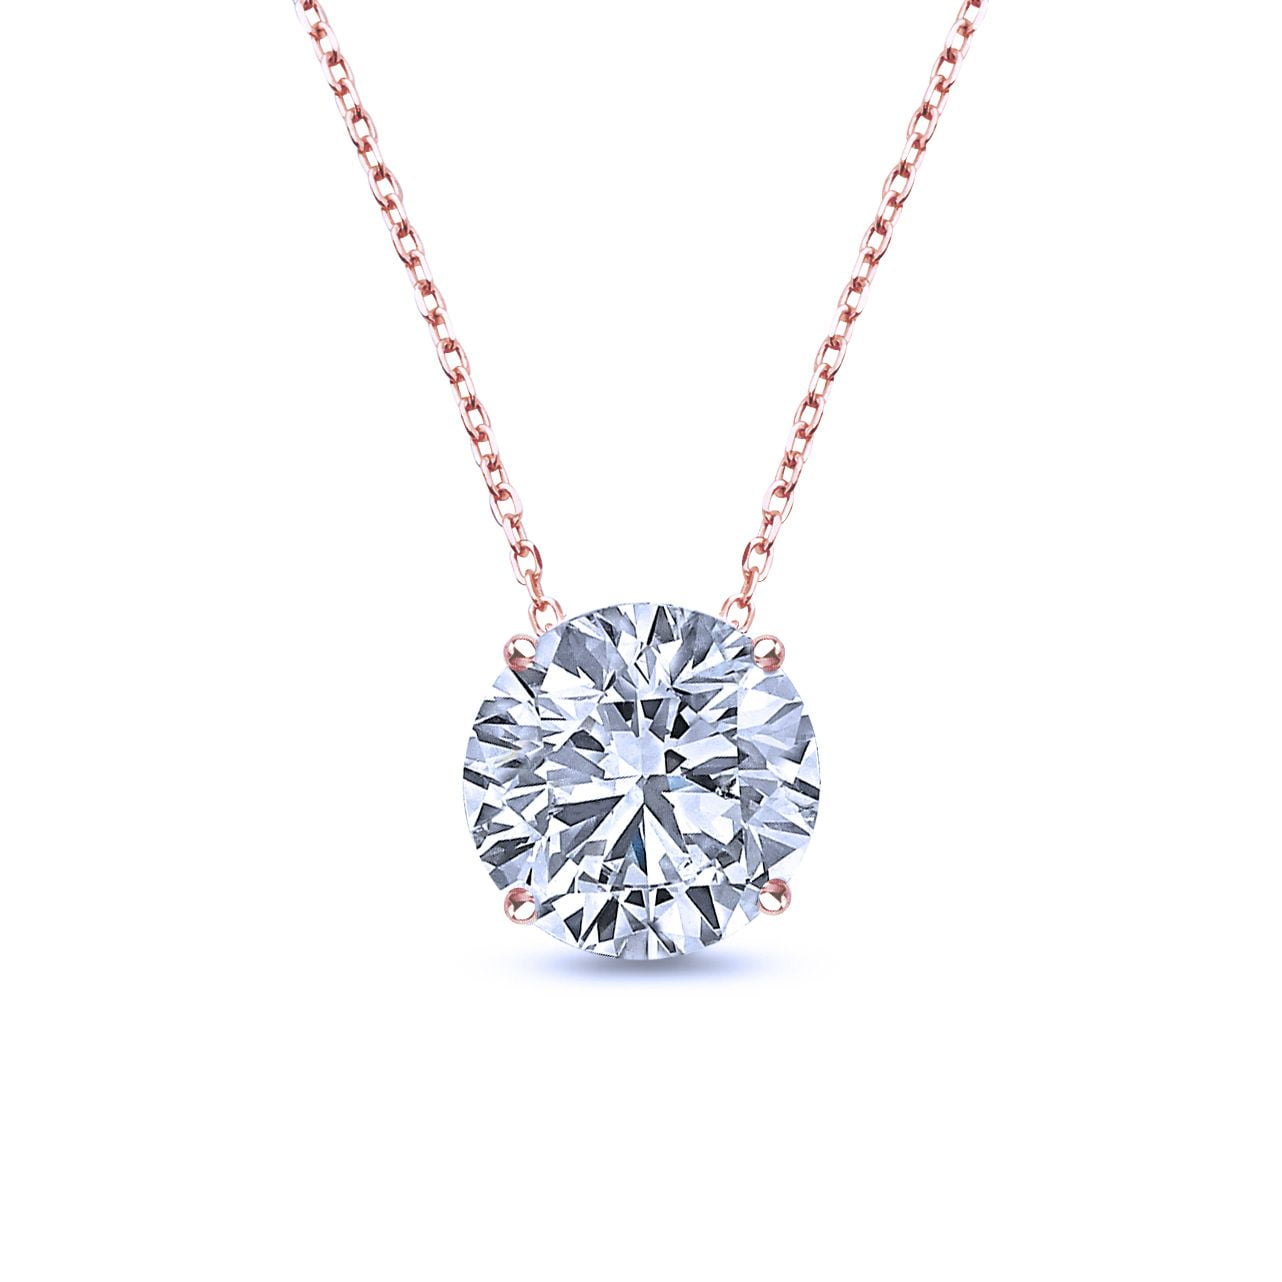 1 Carat Round Cut Real Moissanite Solitaire Pendant Necklace in 18k Rose Gold Over Silver